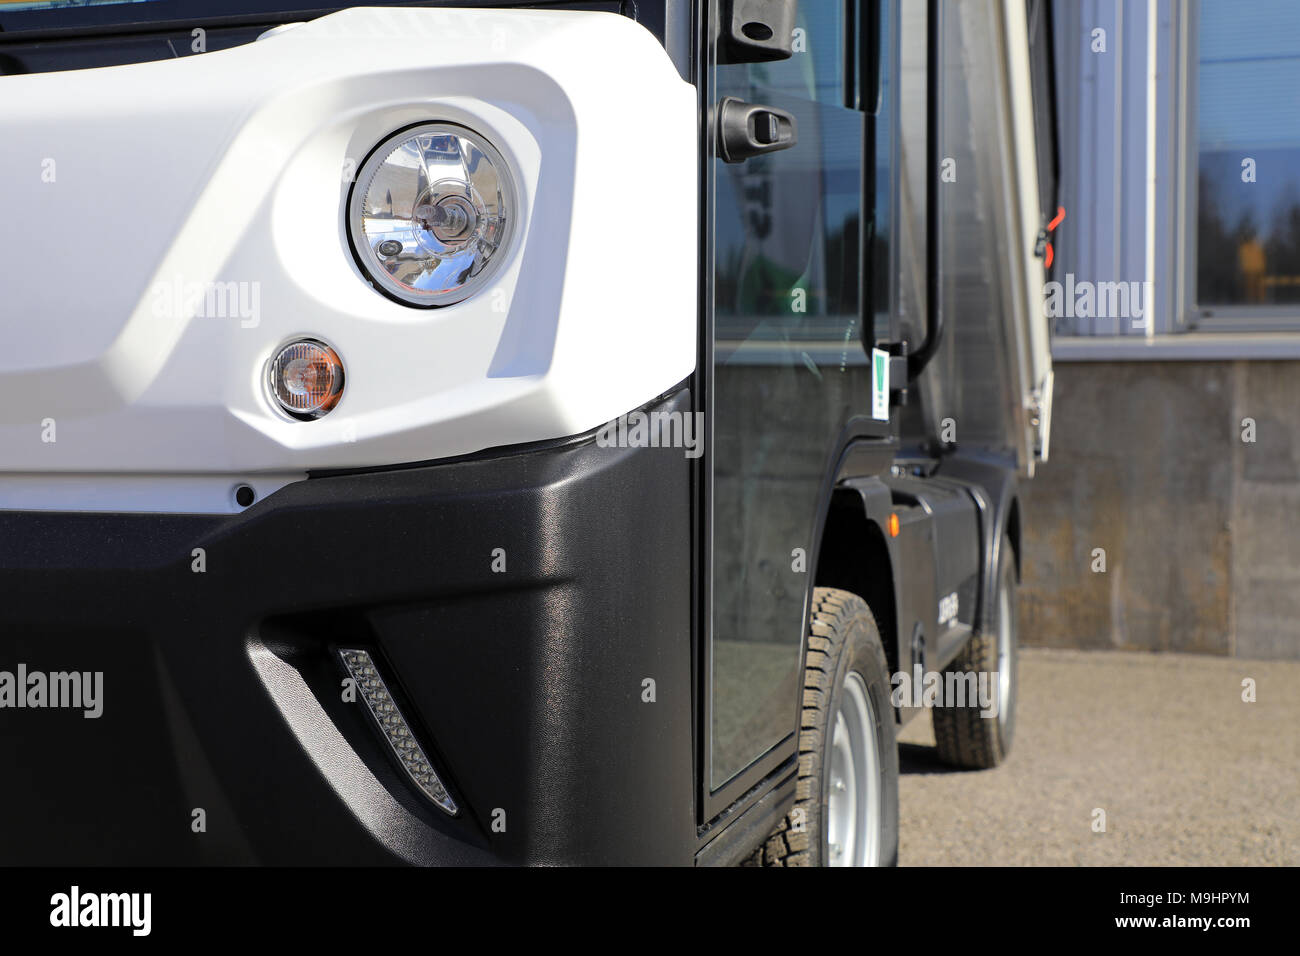 LIETO, FINLAND - MARCH 24, 2018: Headlight detail of Goupil G4 electric utility vehicle seen at the annual public event of Konekaupan Villi Lansi Mach Stock Photo